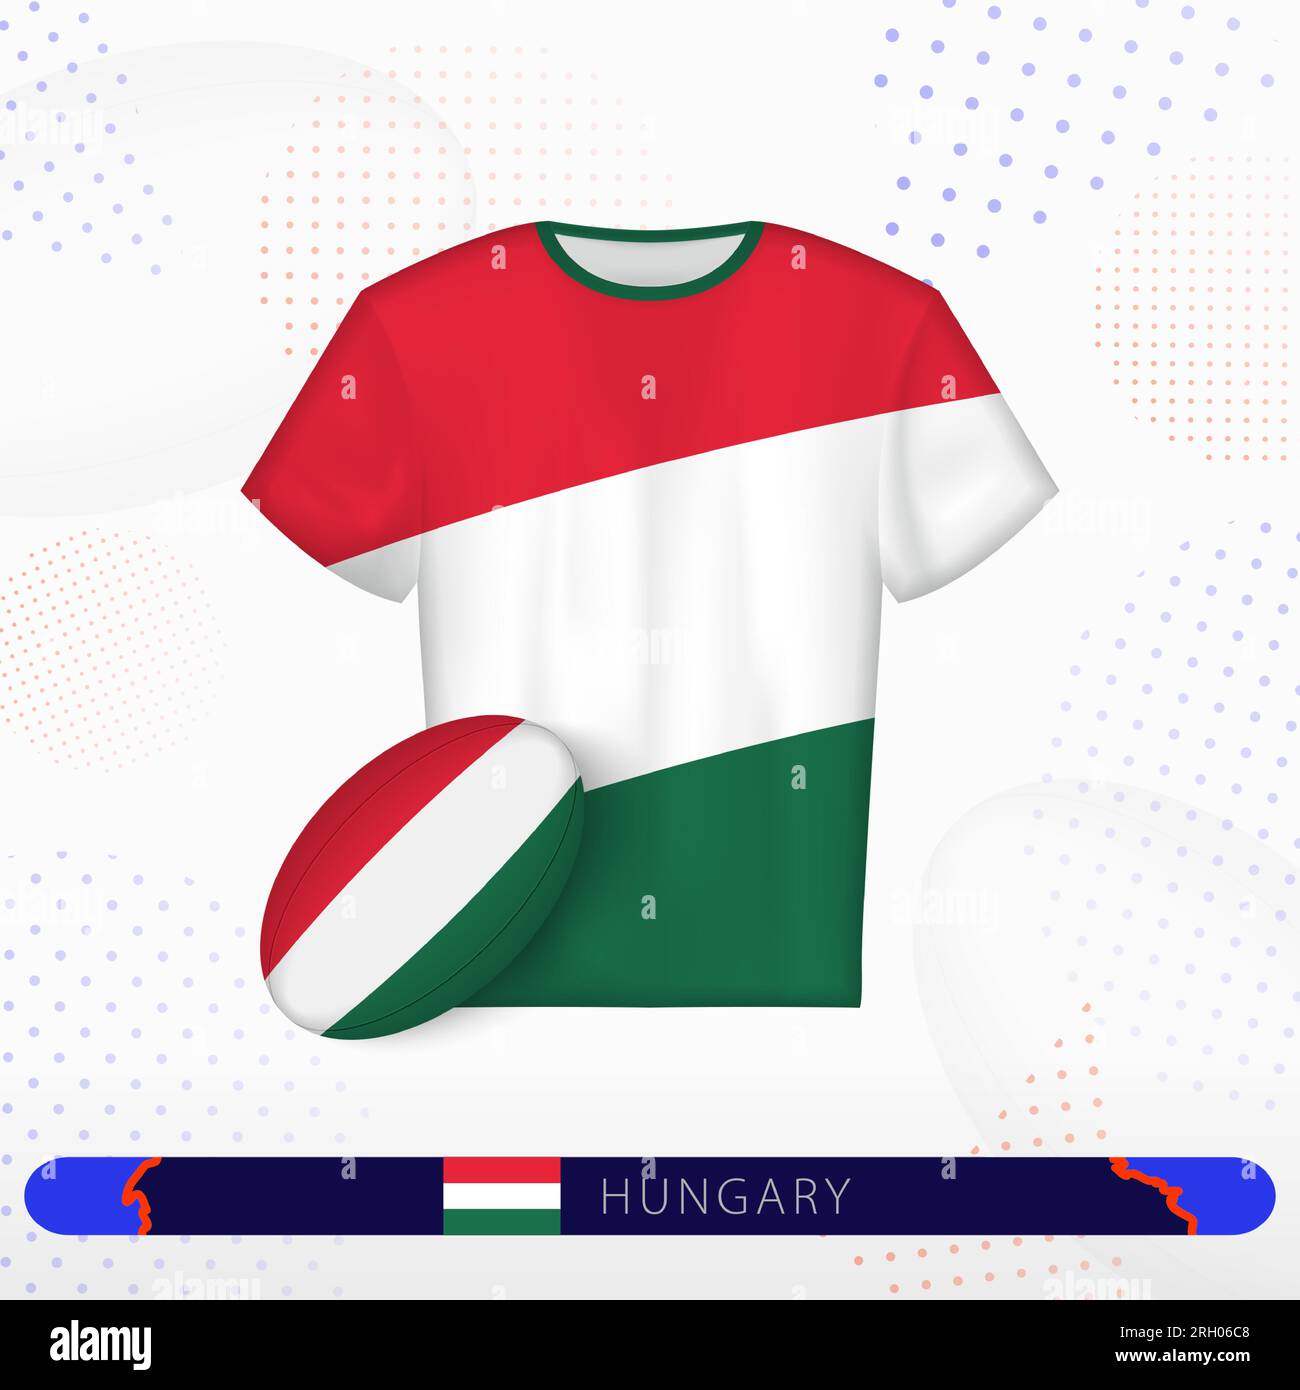 Hungary rugby jersey with rugby ball of Hungary on abstract sport background. Jersey design. Stock Vector